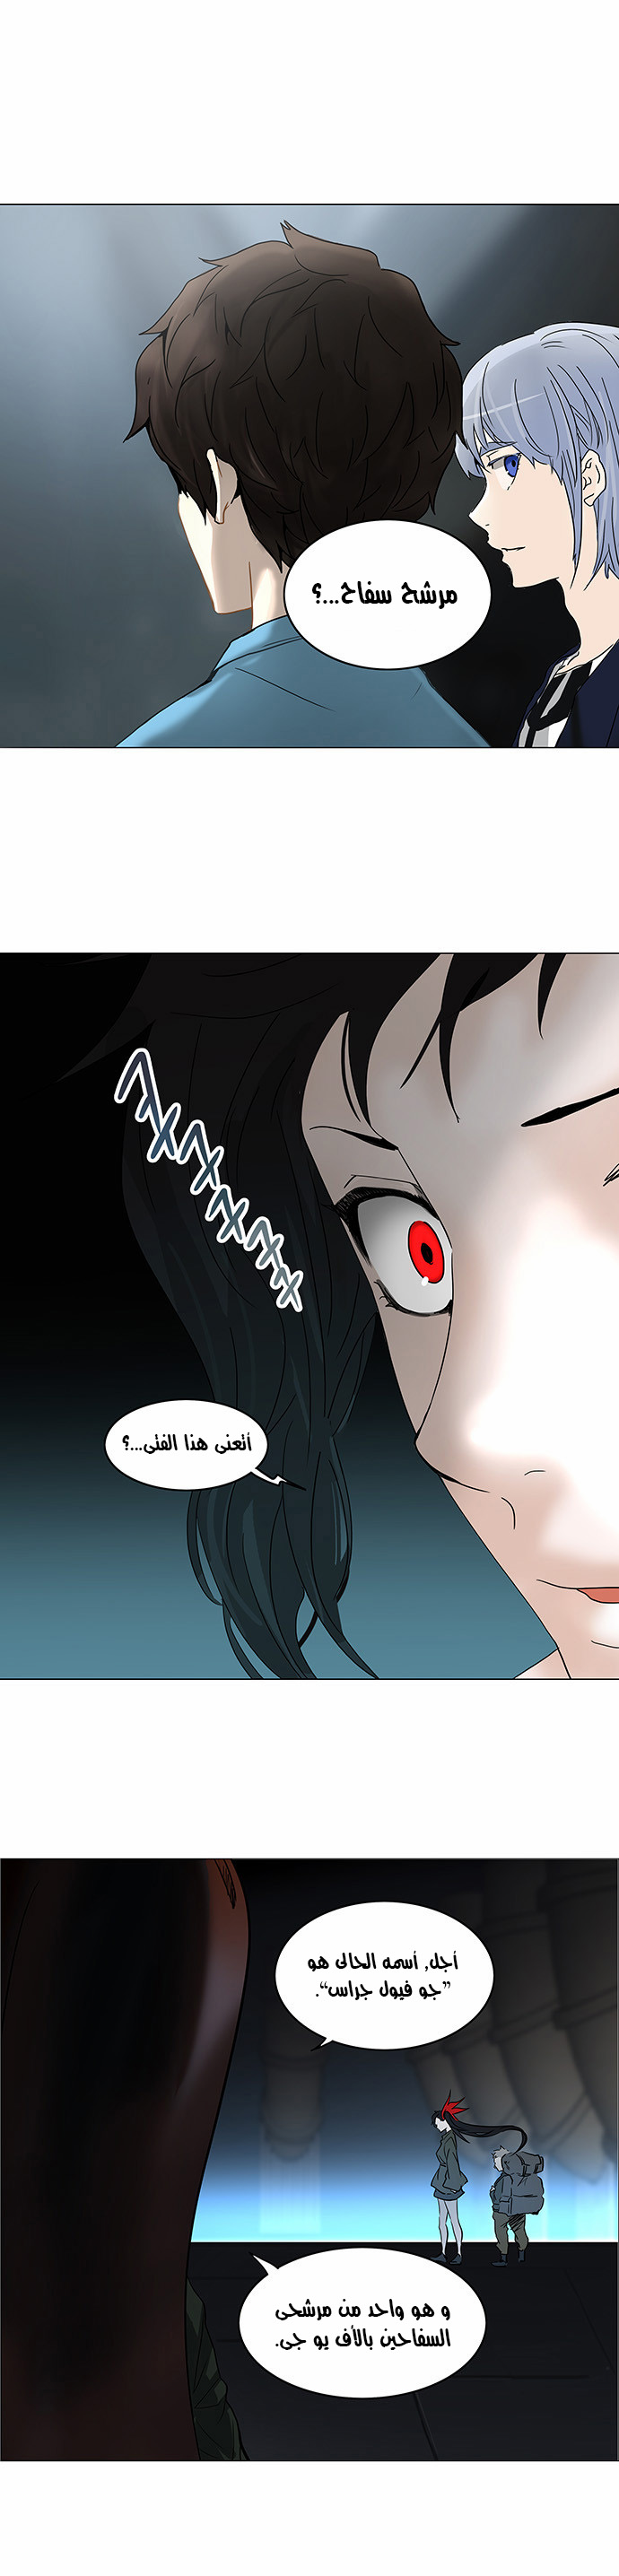 Tower of God 2: Chapter 173 - Page 1